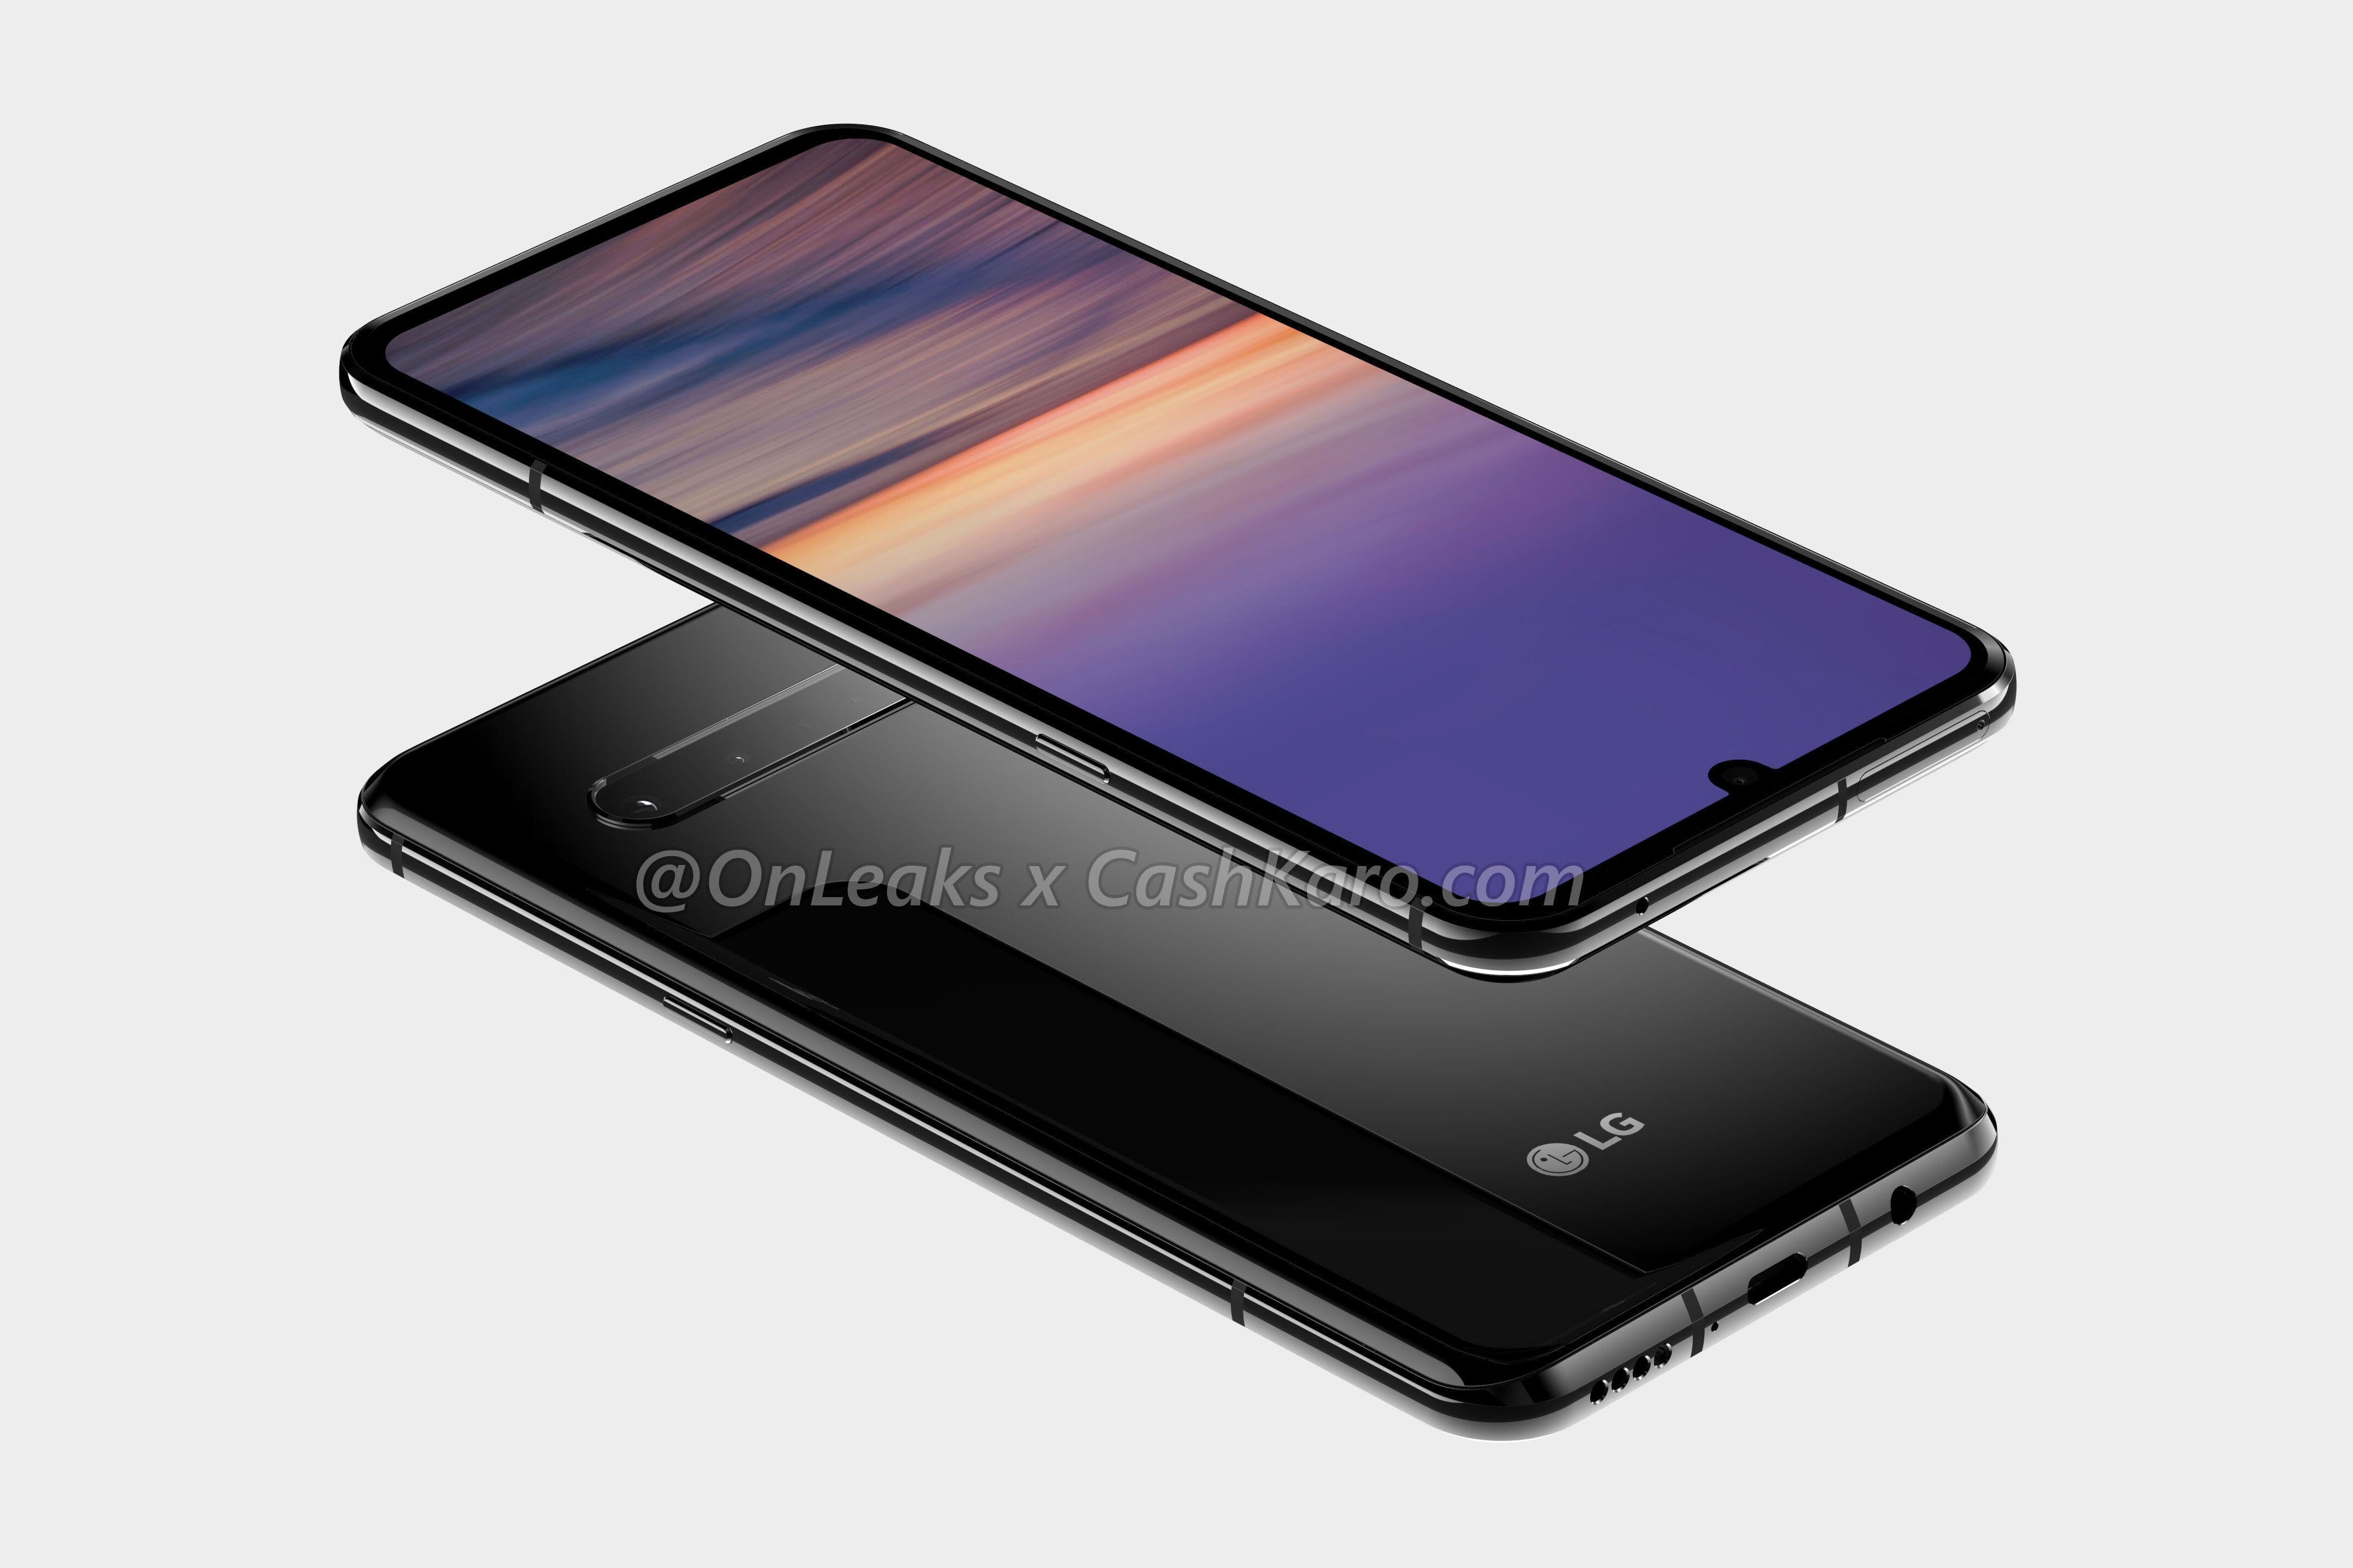 LG G9 ThinQ CAD-based render - Alleged LG G9 ThinQ renders show quad-camera setup, notched display